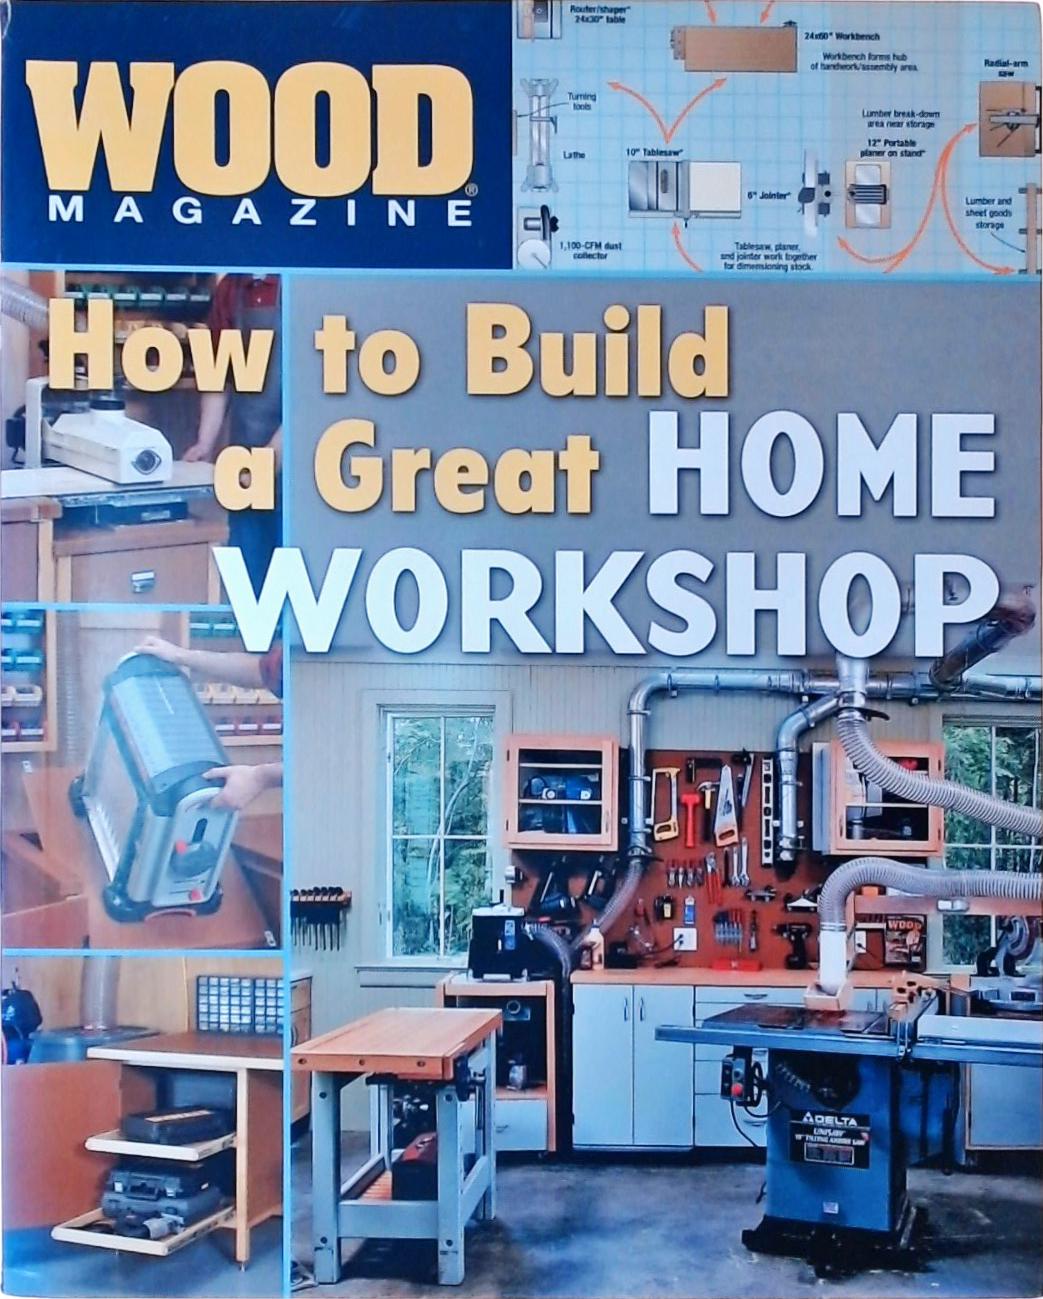 Wood Magazine - How to Build a Great Home Workshop